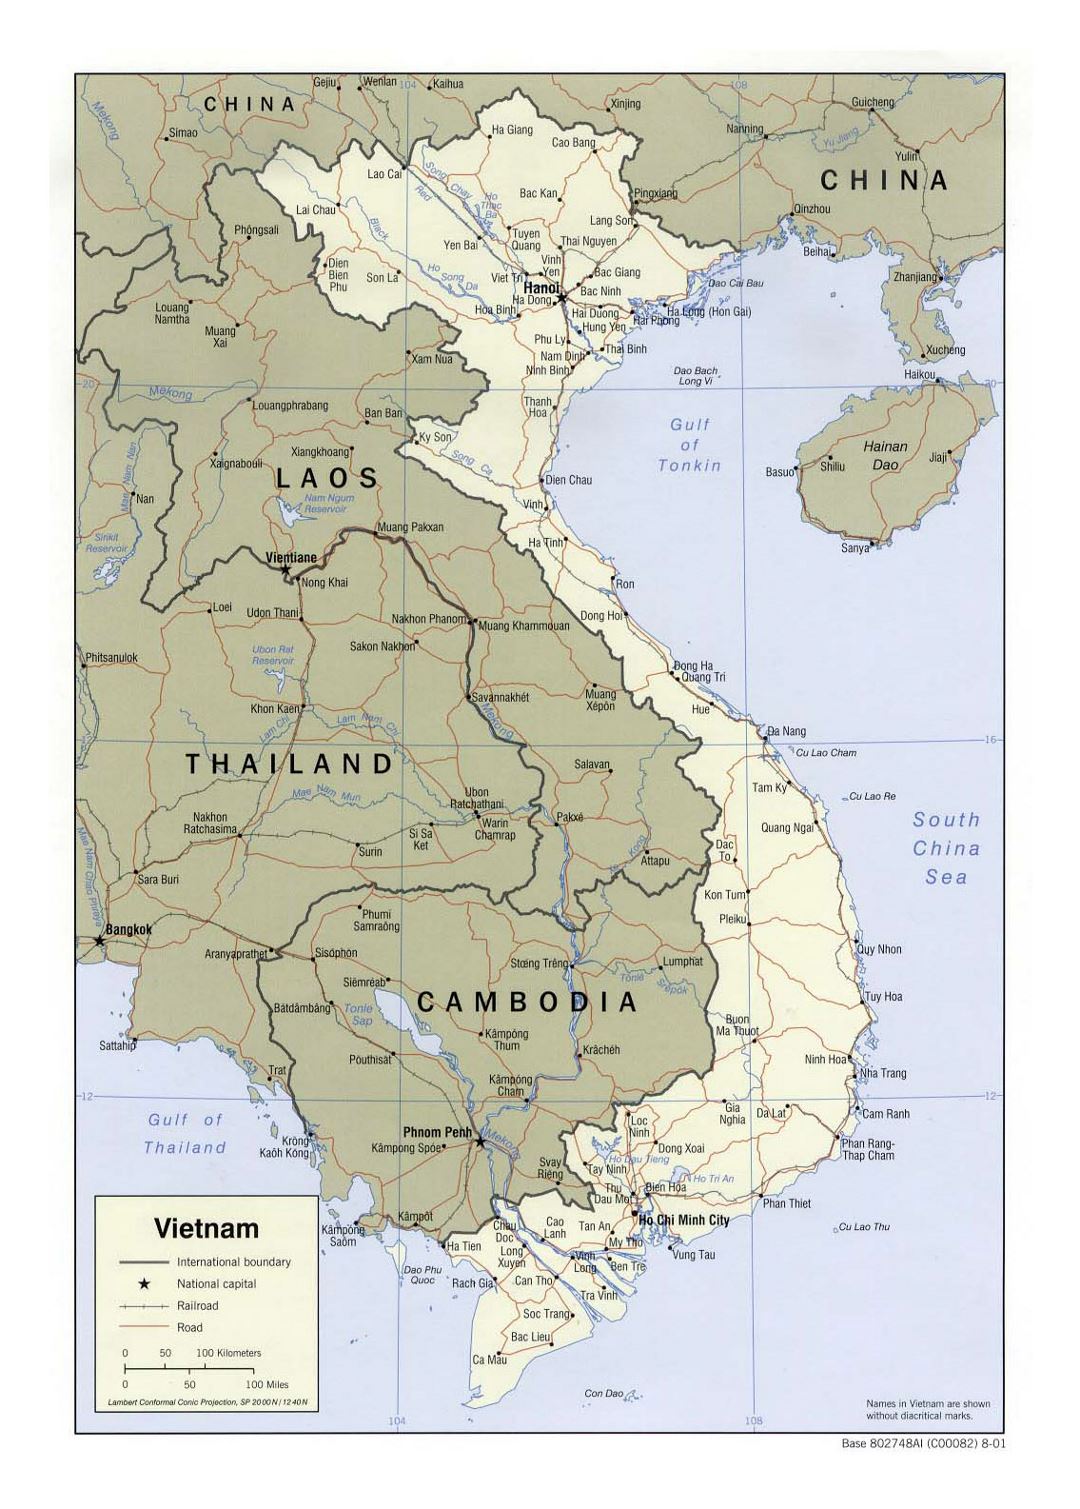 Detailed political map of Vietnam with roads, railroads and major cities - 2001